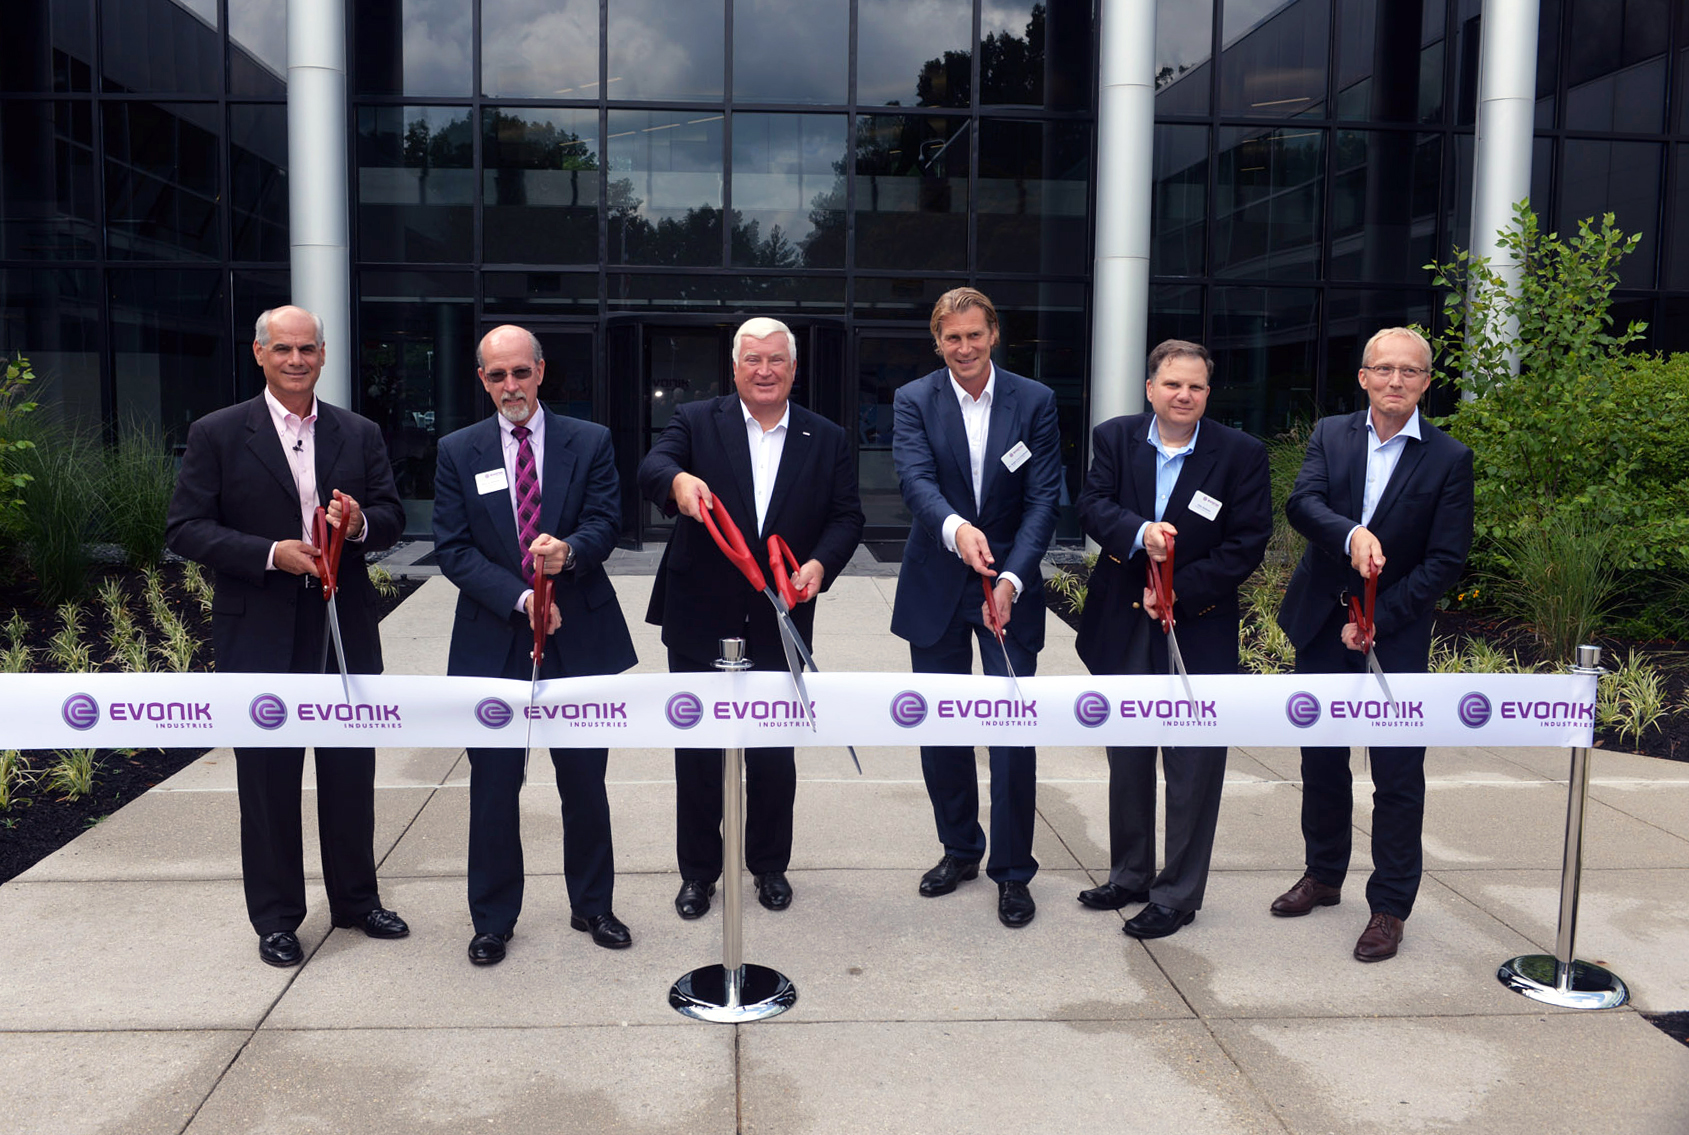 Evonik expands commercial and lab space at US facility